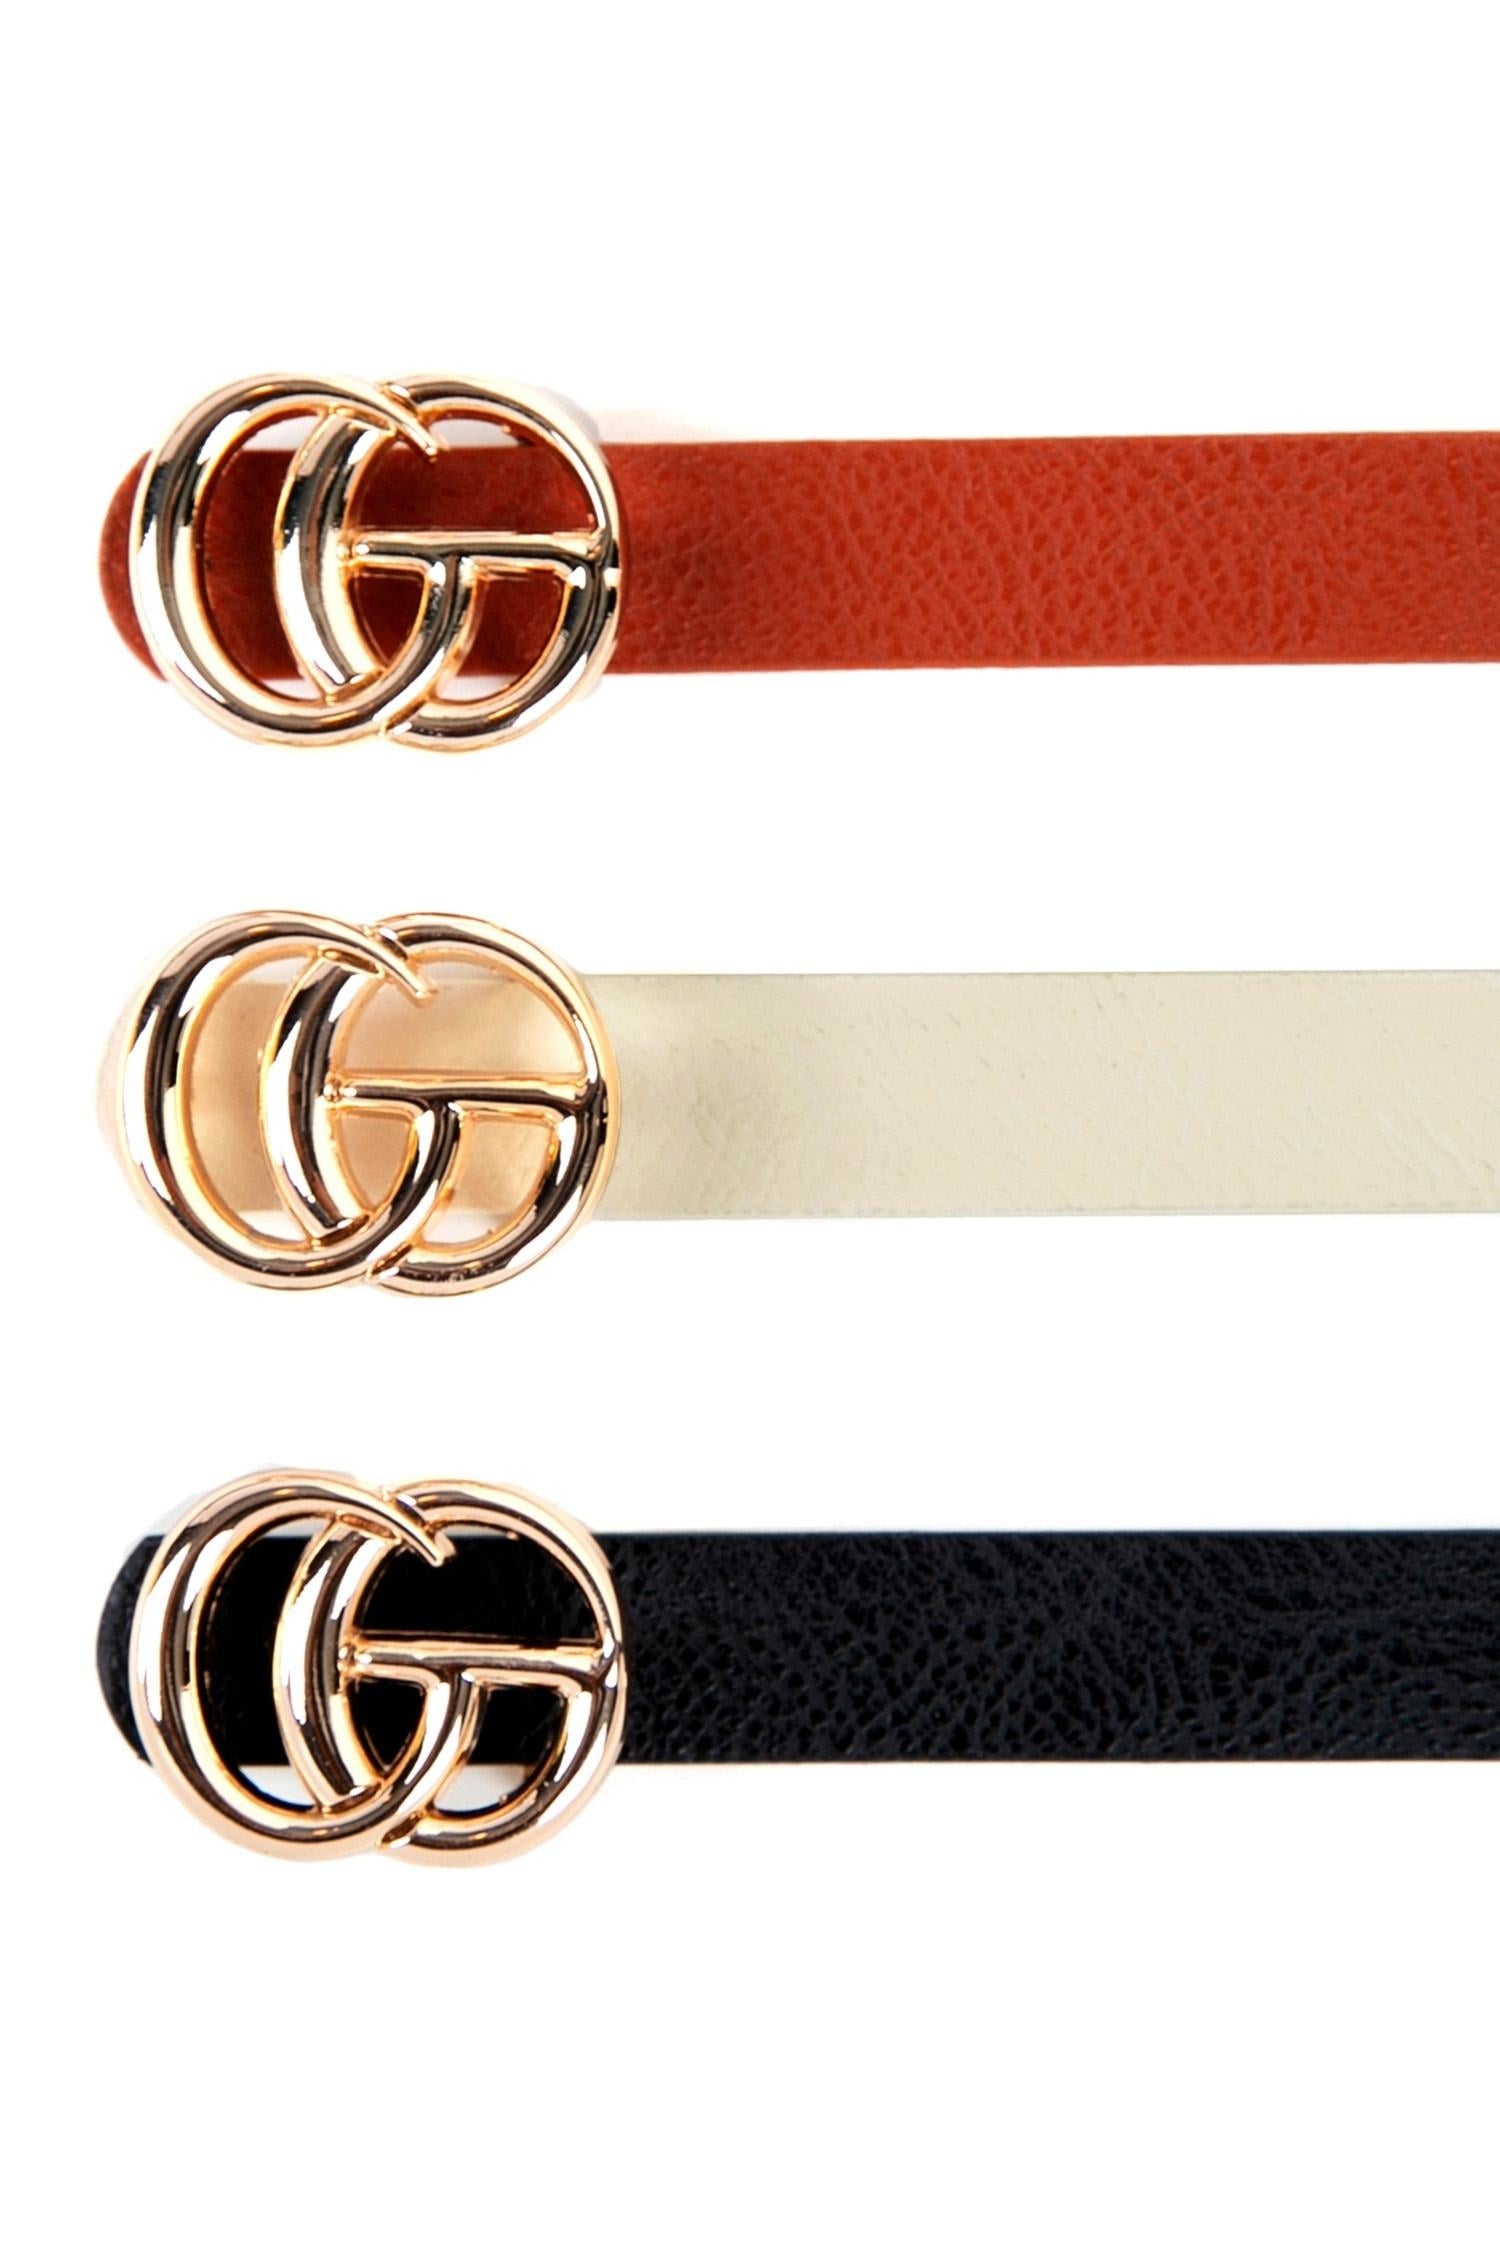 Essential Skinny Belt Pack - Lady Occasions